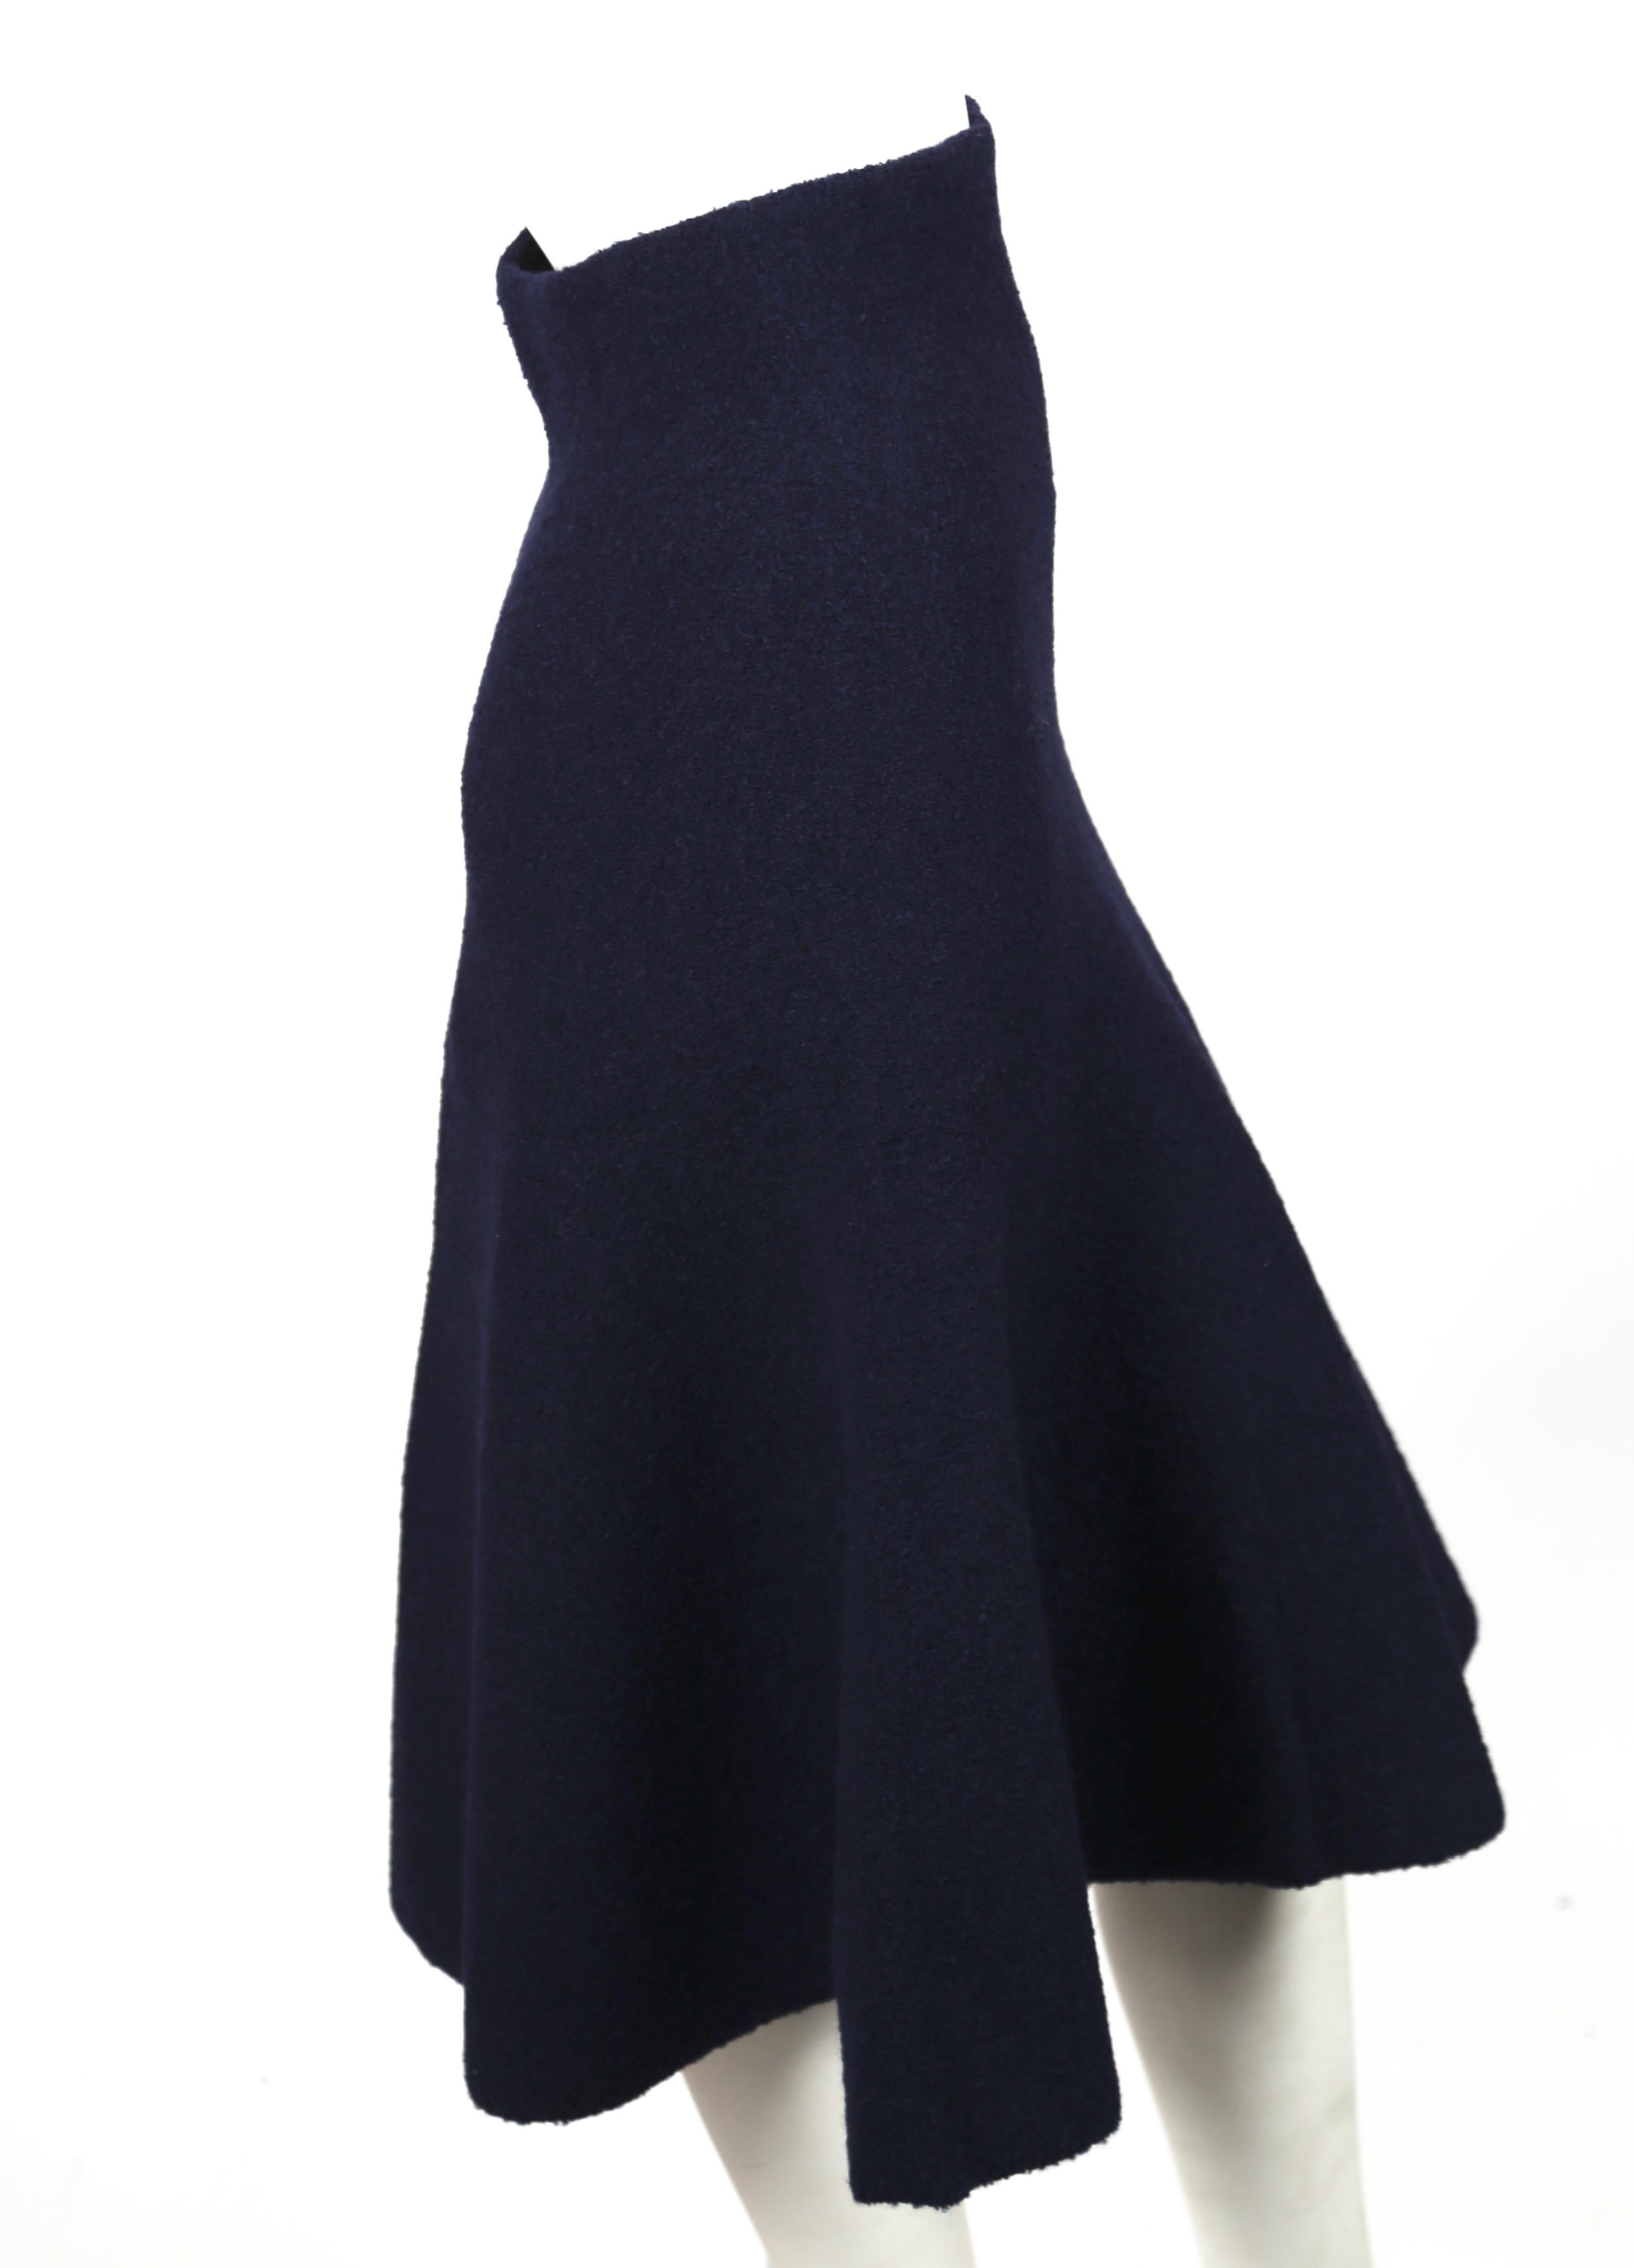 Deep navy-blue, flared knit skirt designed by Phoebe Philo for Celine exactly as seen on the runway for fall of 2013. Very flattering and comfortable fit. Labeled a French size S. Approximate measurements (unstretched) : 26